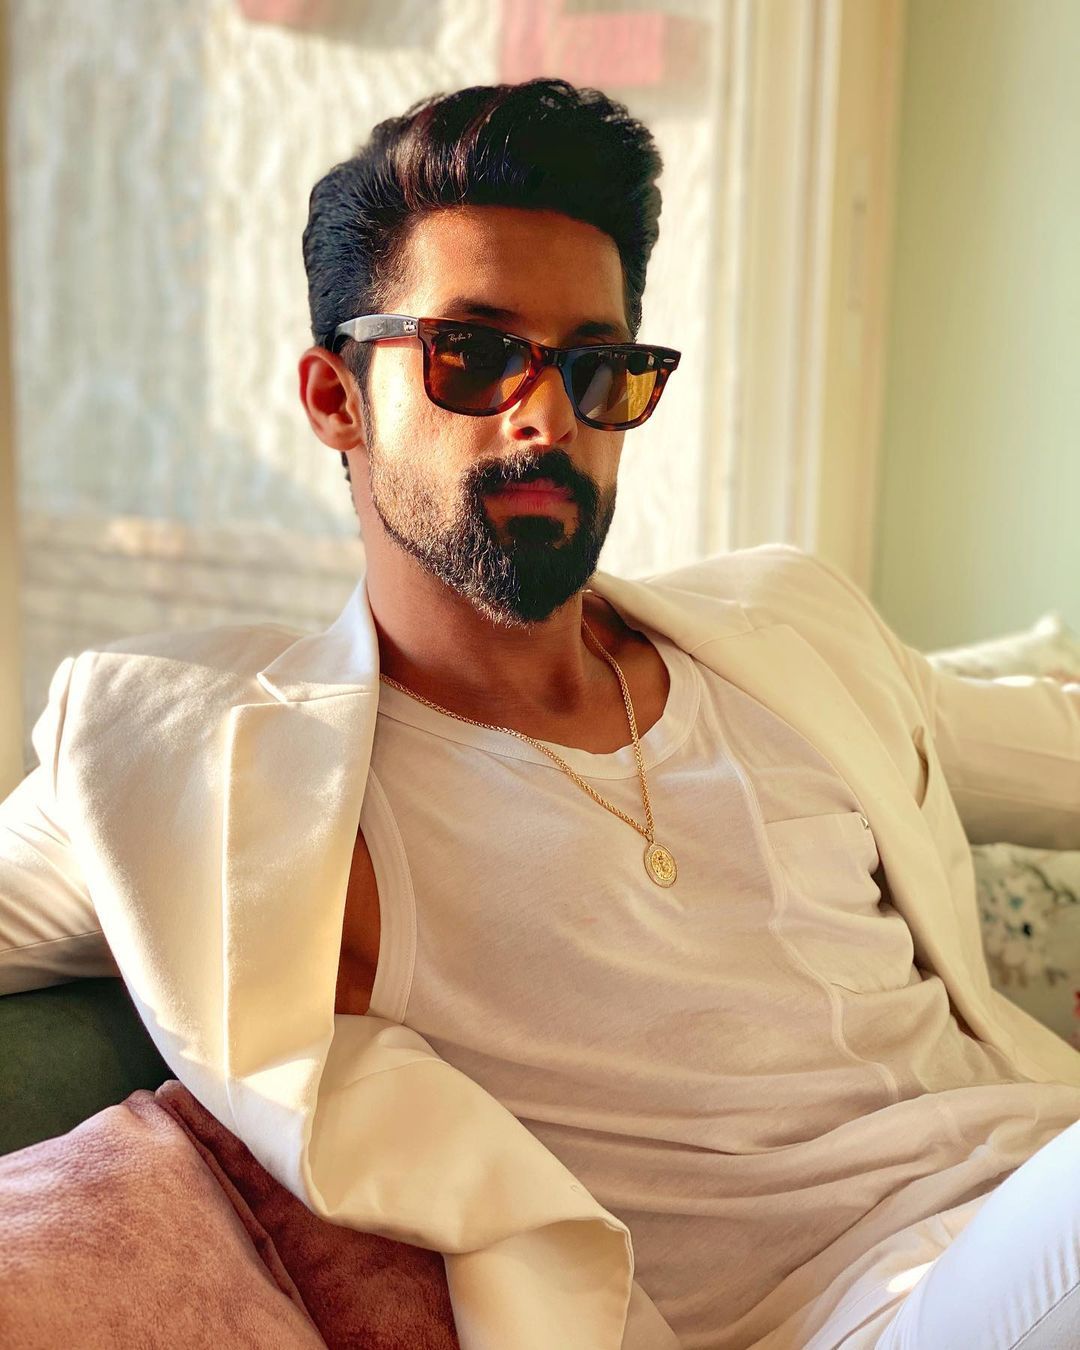 Ravi Dubey Tests Positive For Covid-19 Days After Getting First Jab of Vaccine